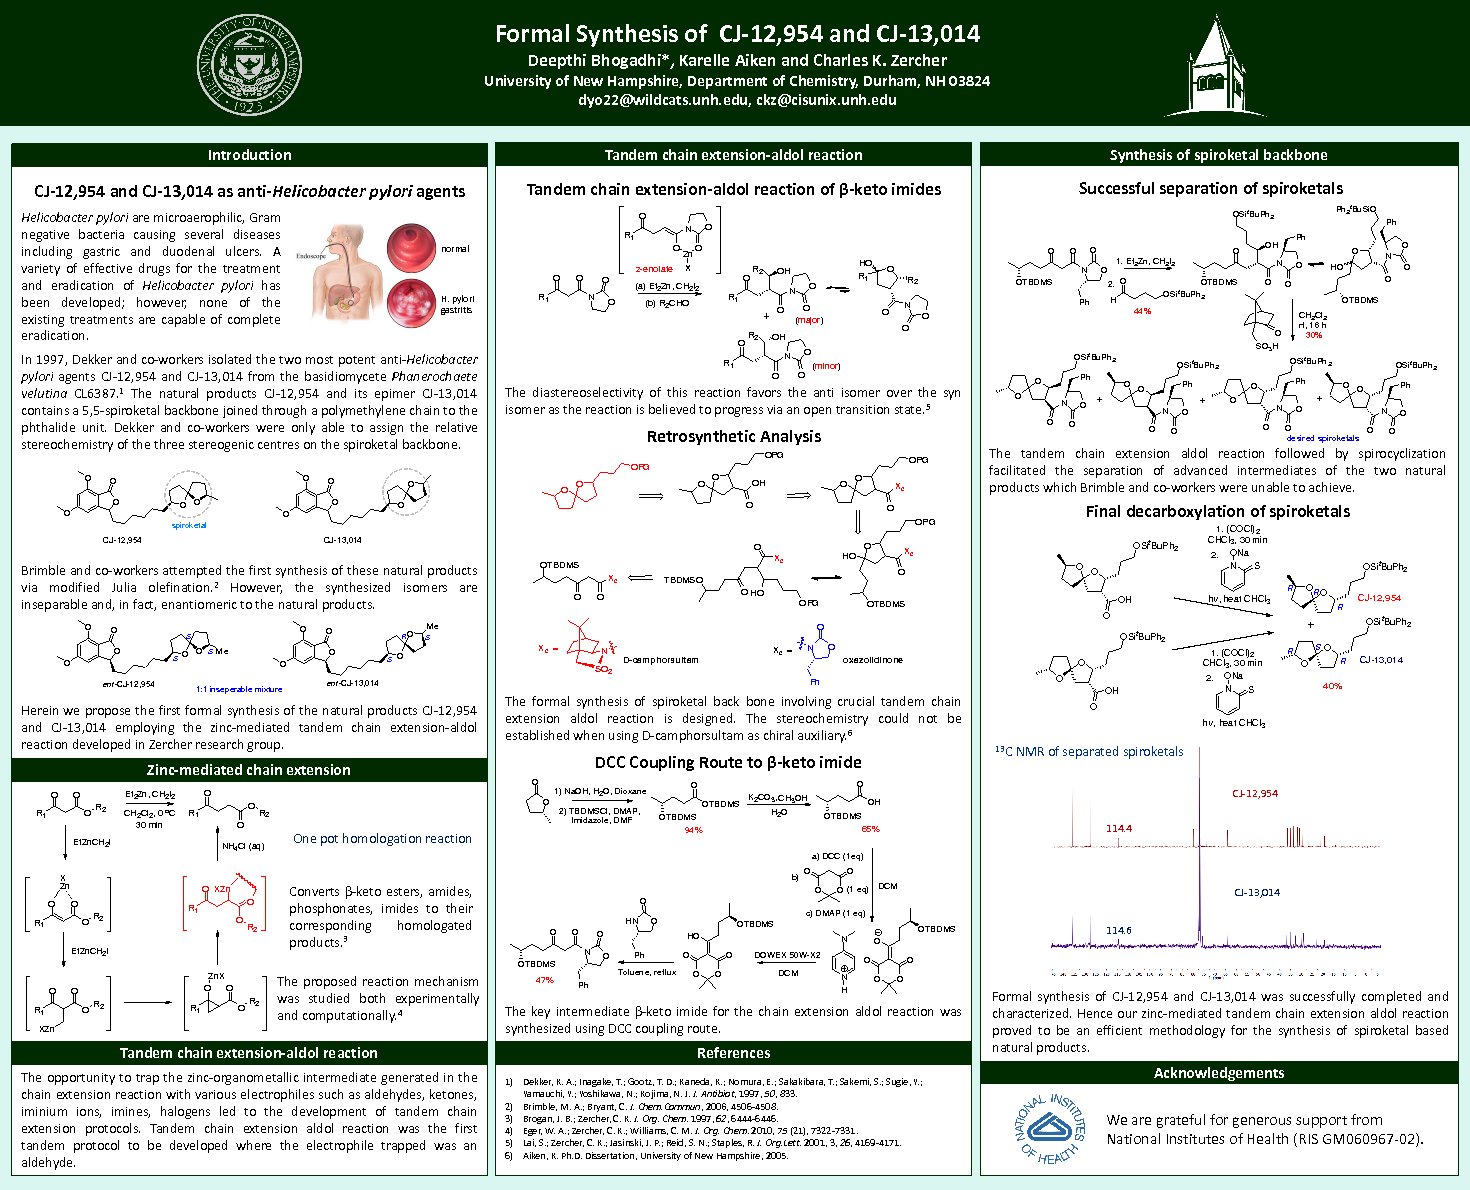 Formal Synthesis Of Cj-12,954 And Cj-13,014 by Achintya